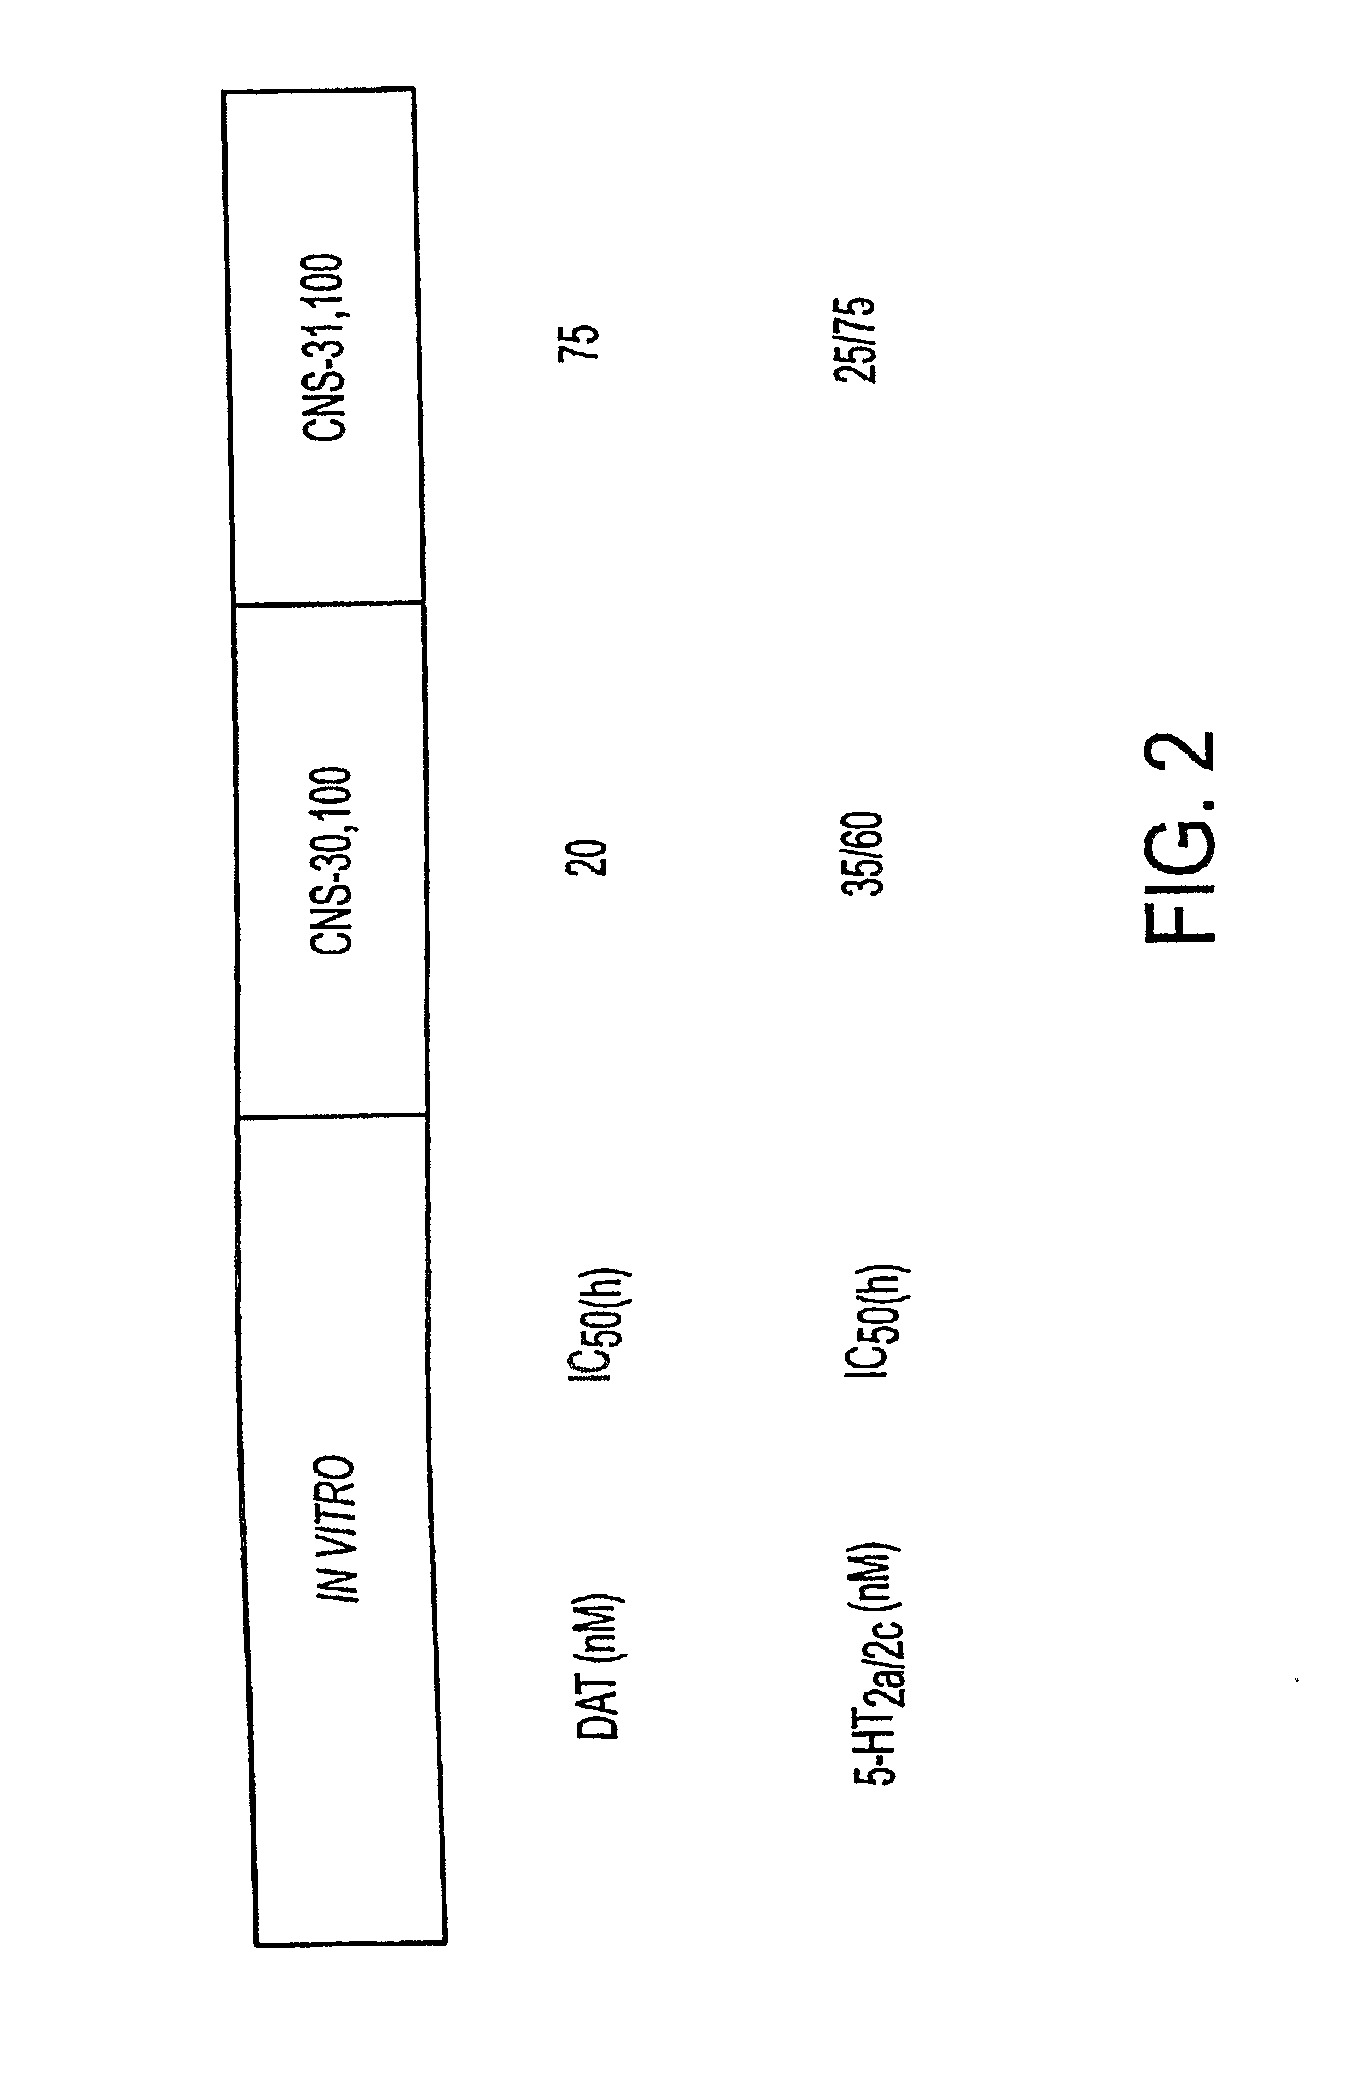 Multimediator Dopamine Transport Inhibitors, and Uses Related Thereto